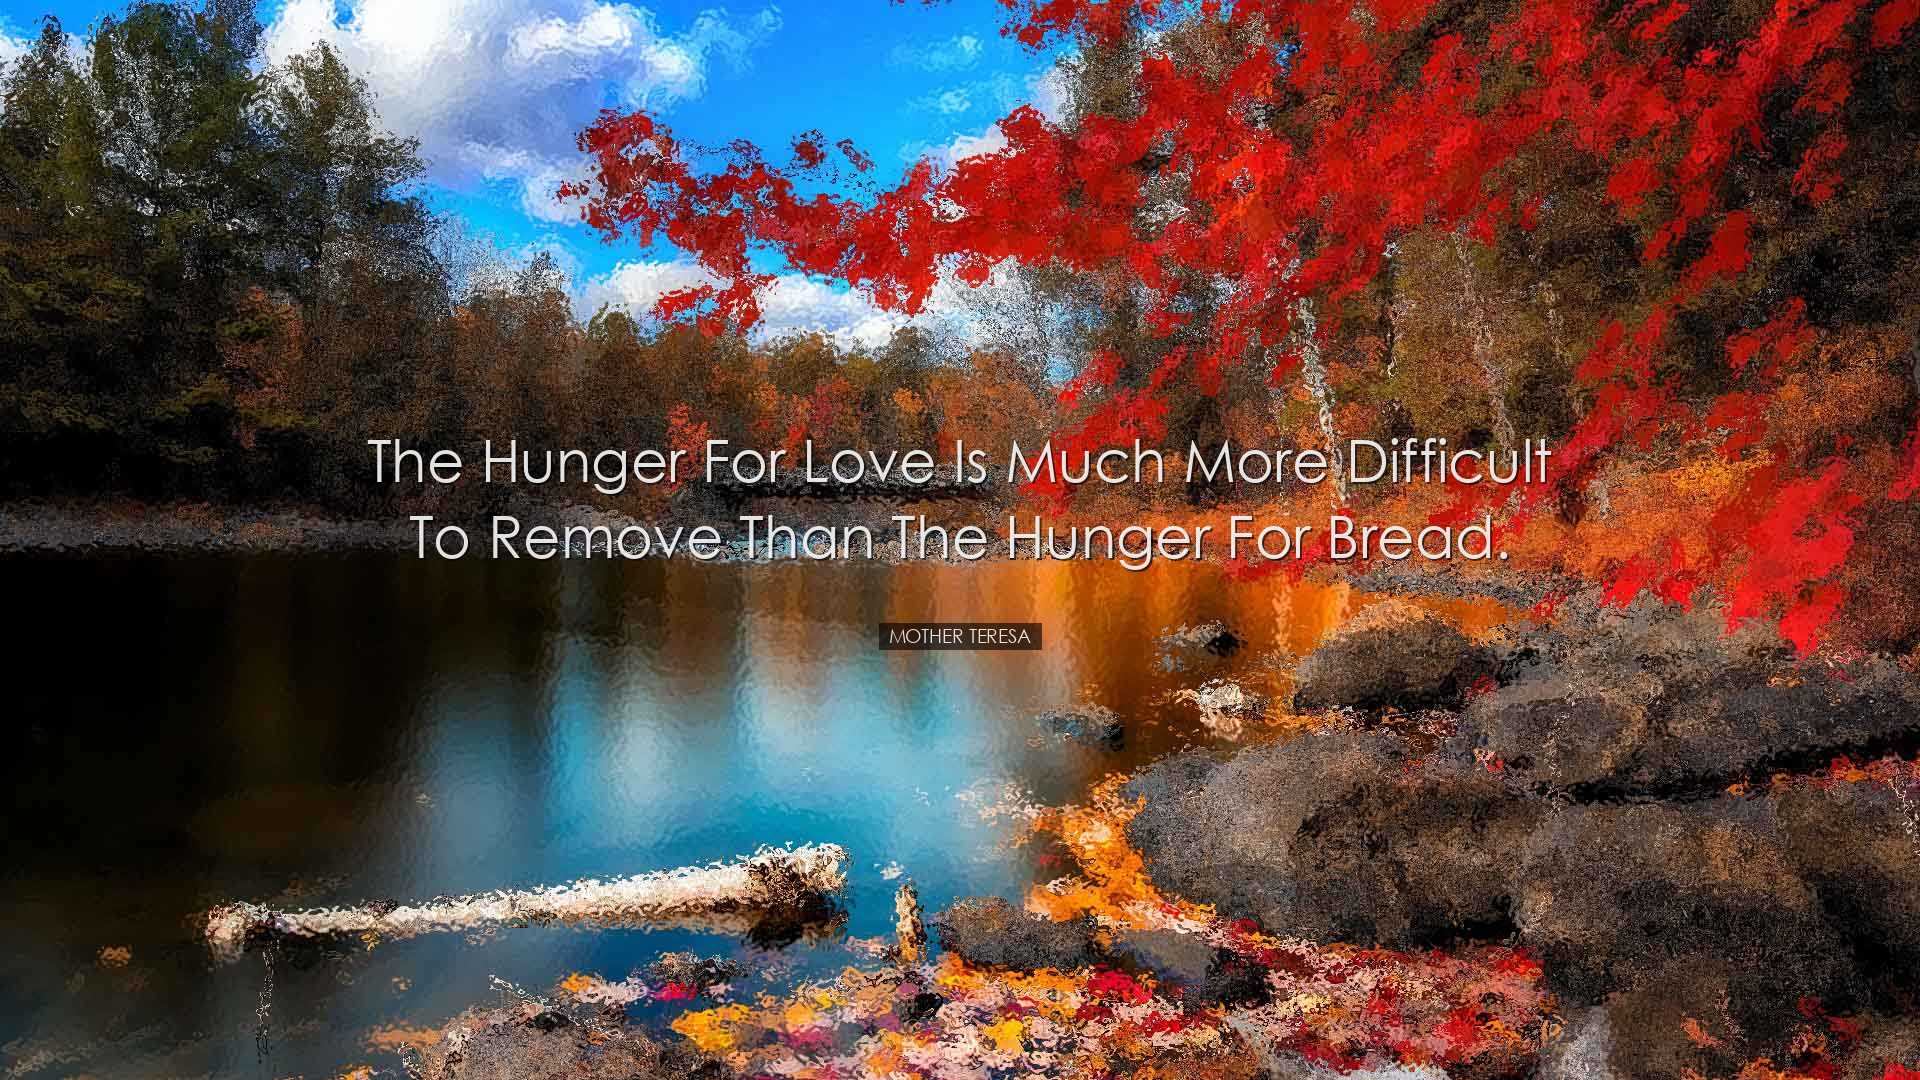 The hunger for love is much more difficult to remove than the hung